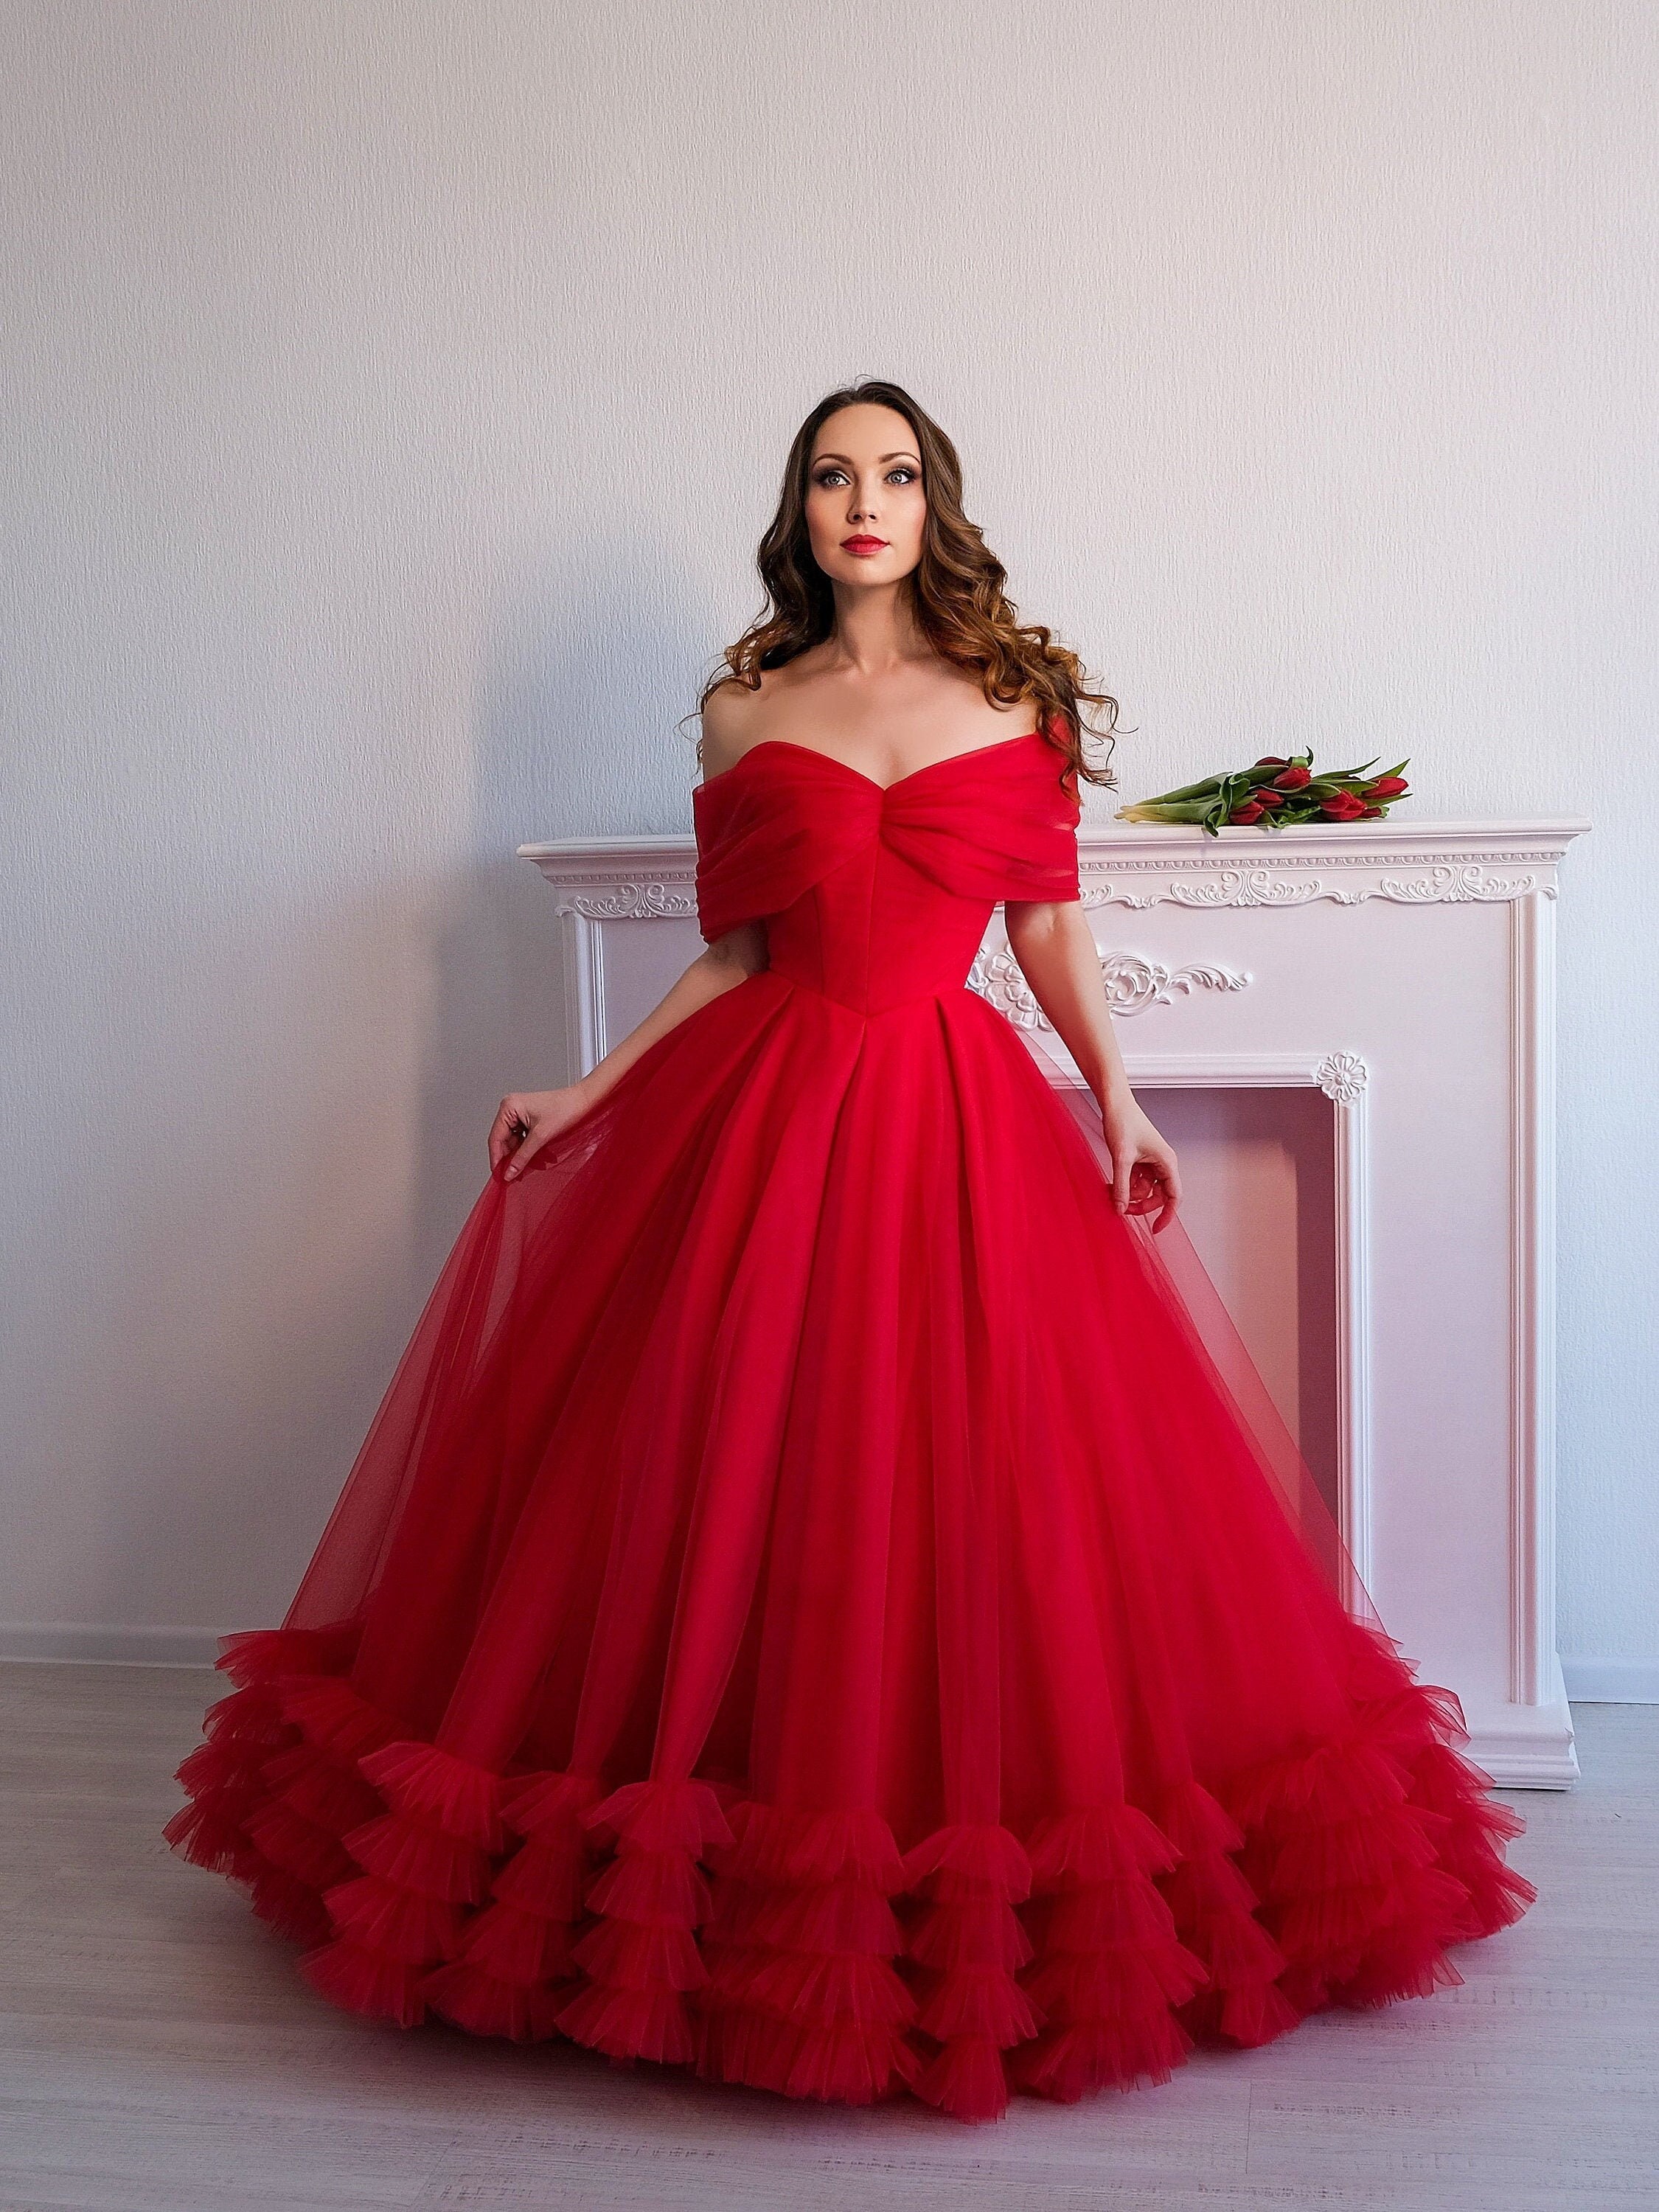 red ball gown dress